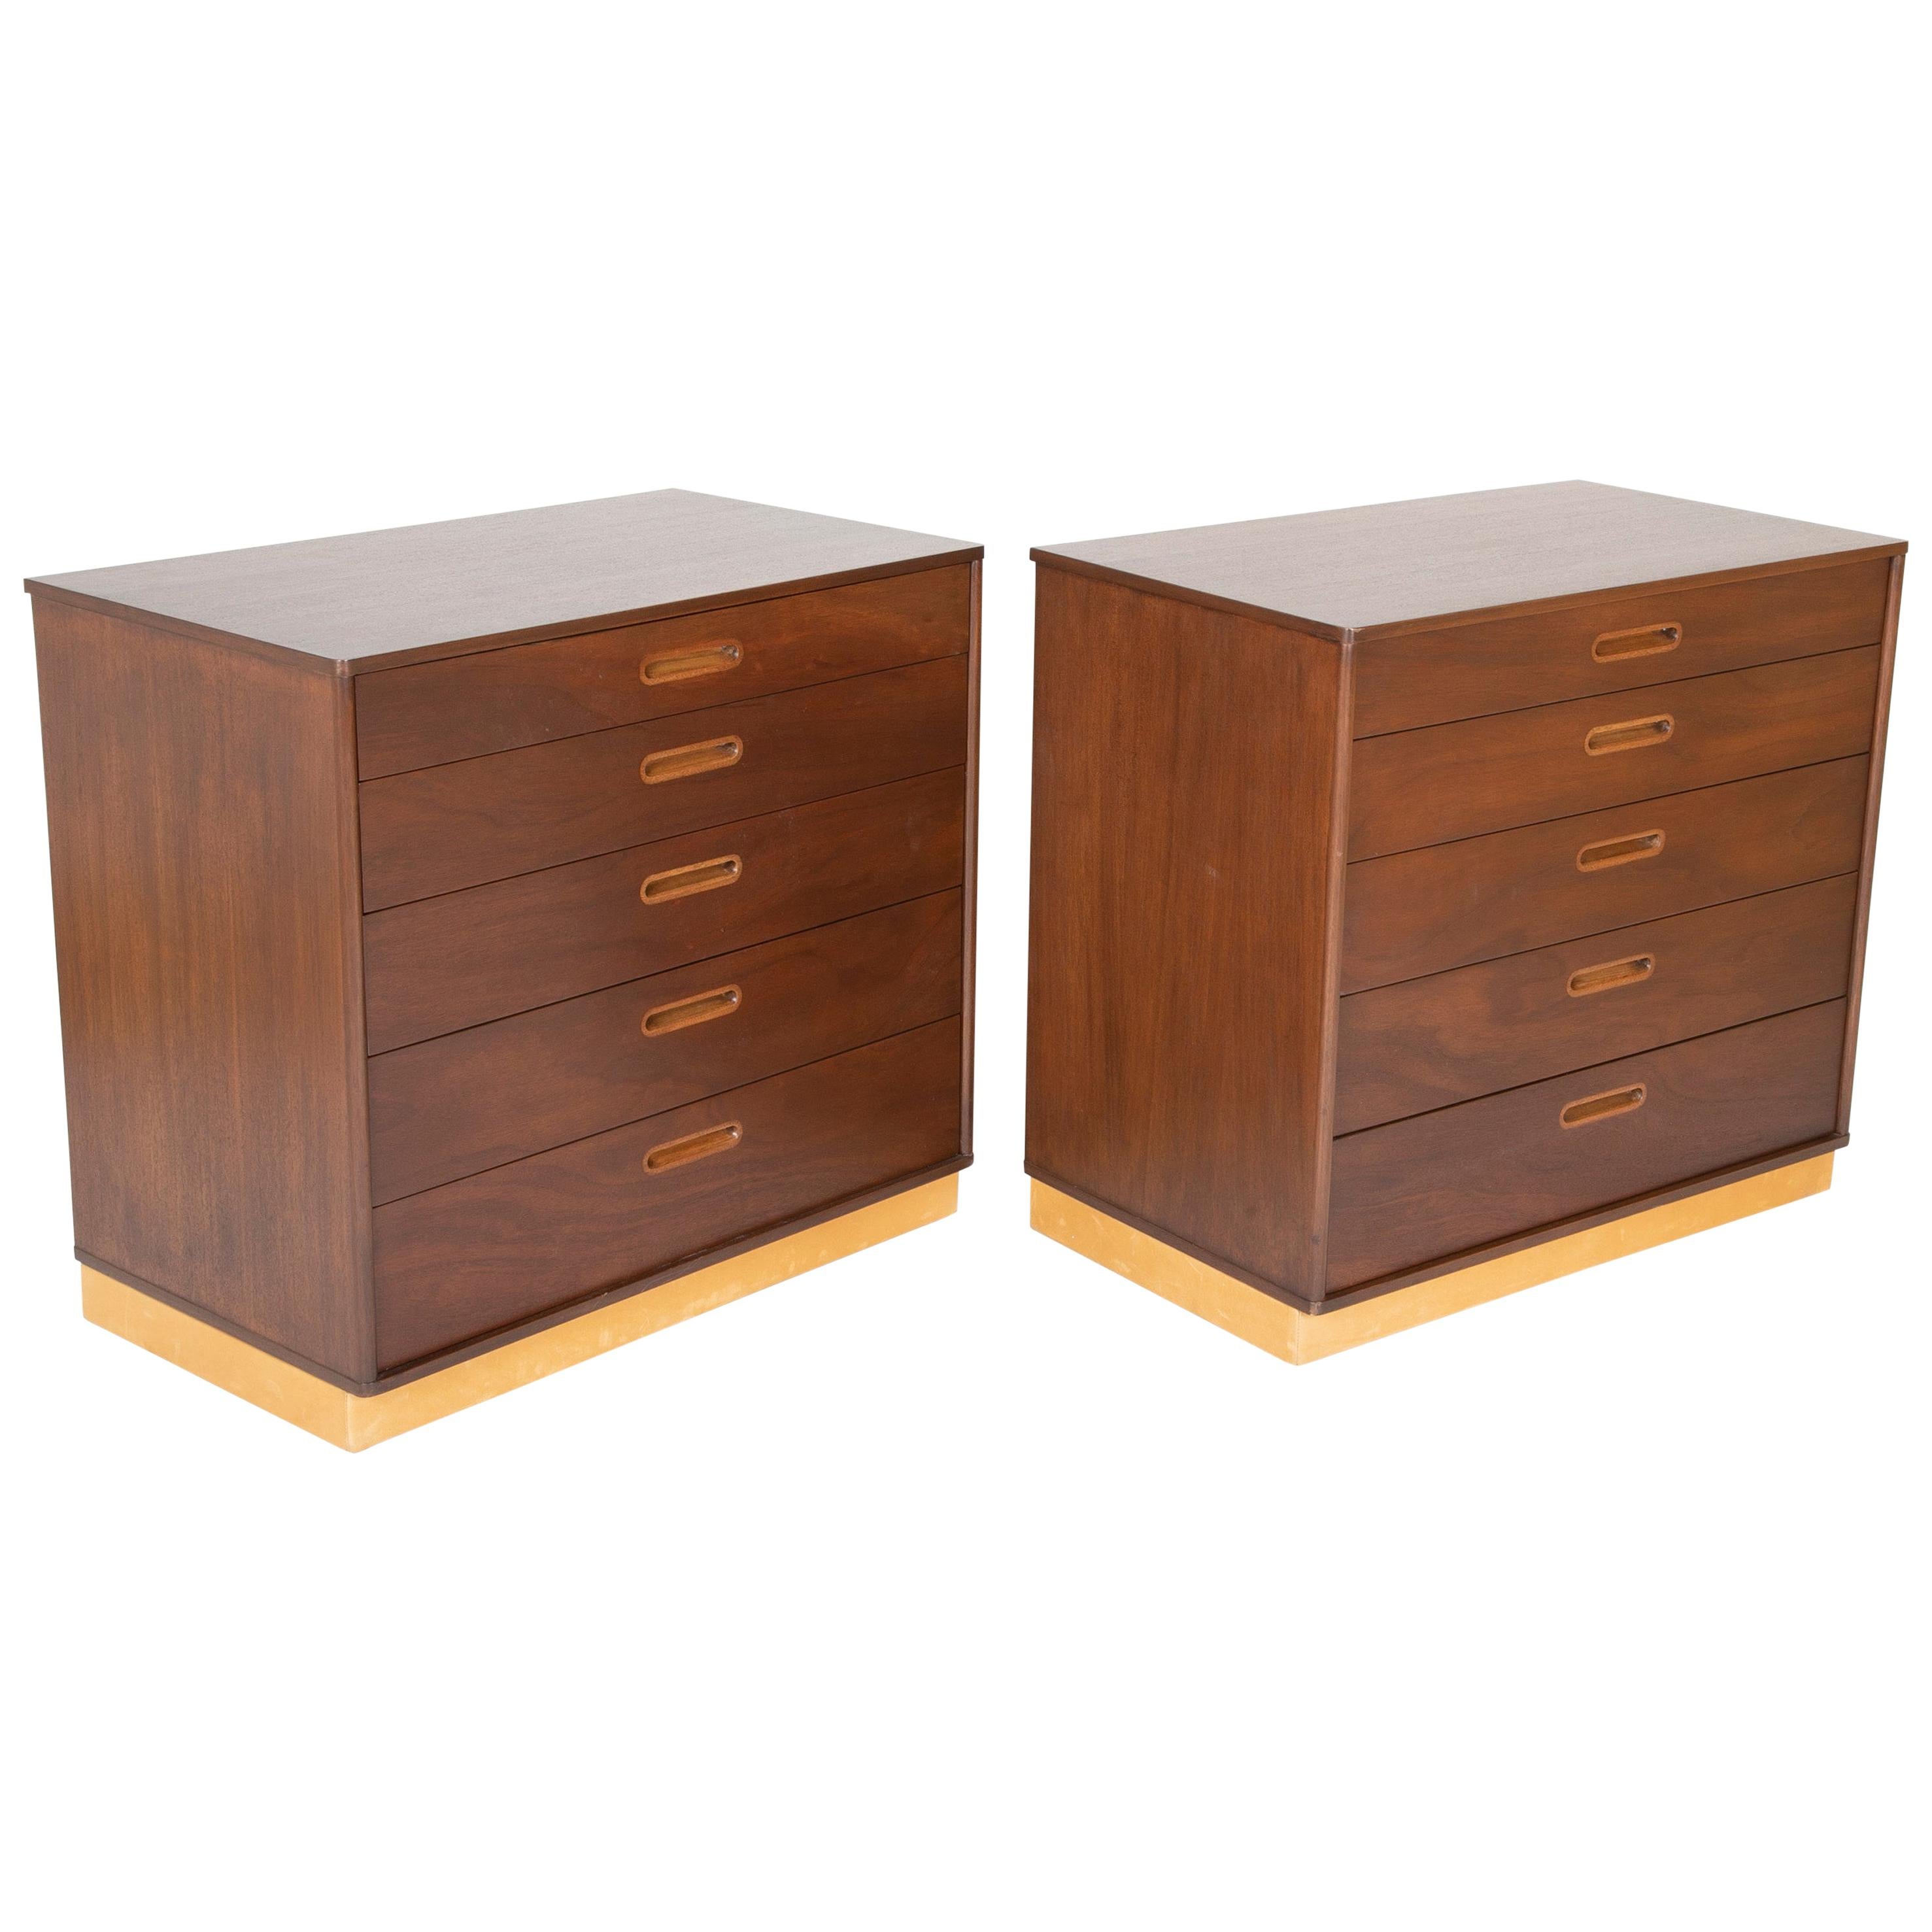 Pair of Leather and Walnut Chests Designed by Edward Wormley for Dunbar For Sale